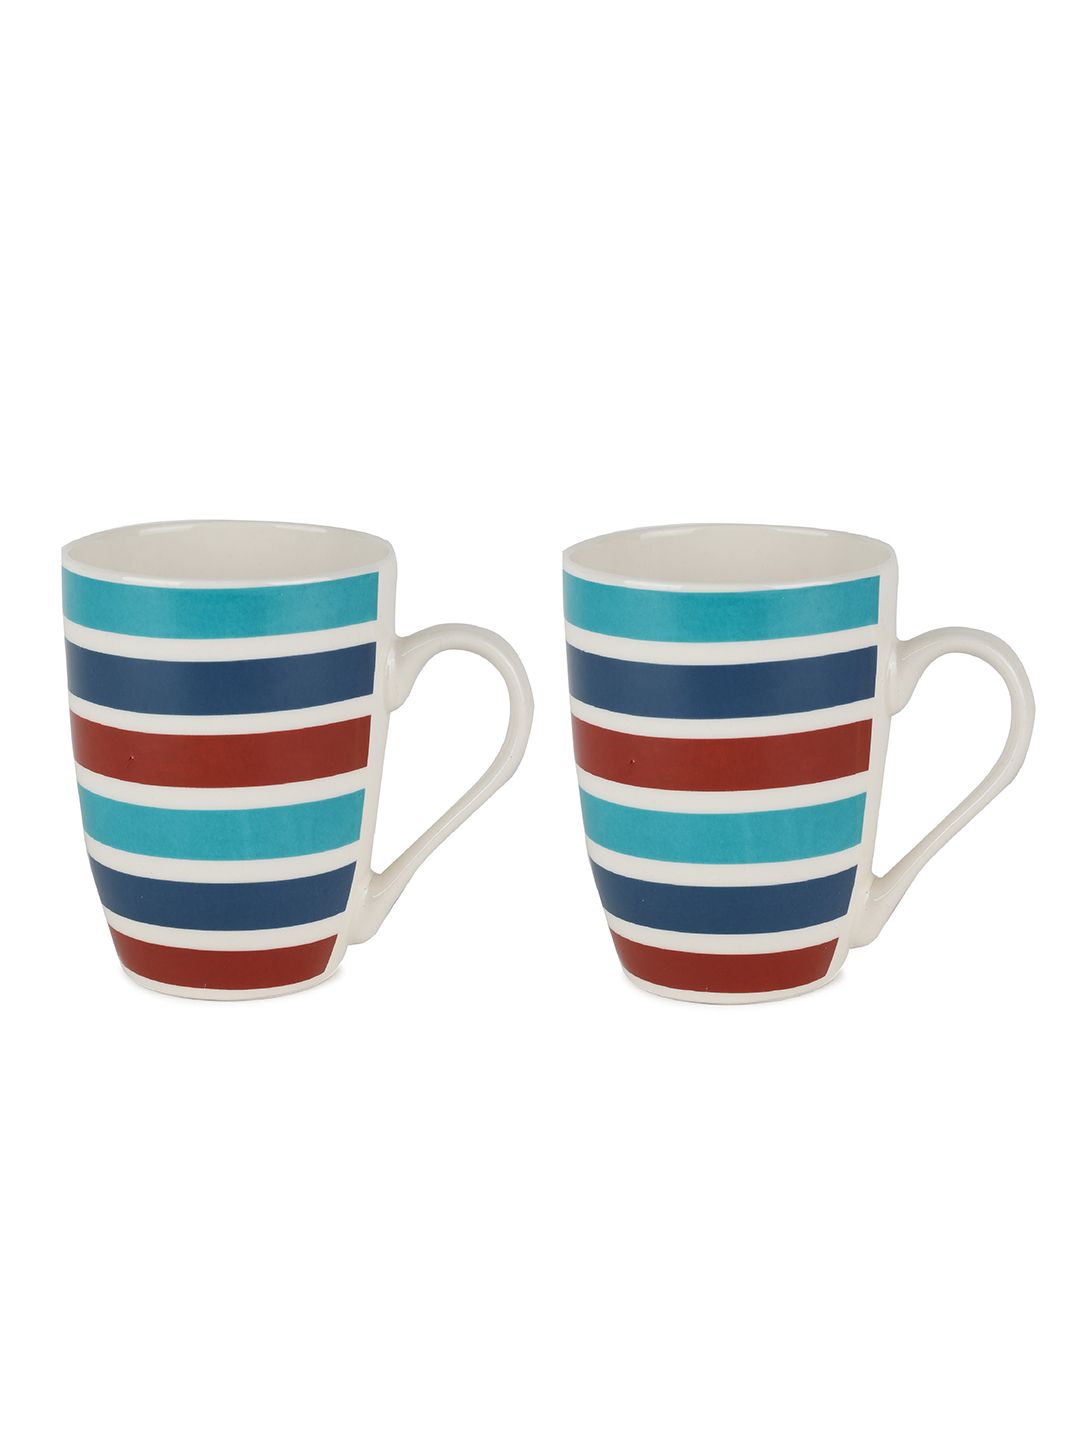 ZEVORA Blue & Maroon Handcrafted Solid Ceramic Glossy Mugs Set of Cups and Mugs Price in India